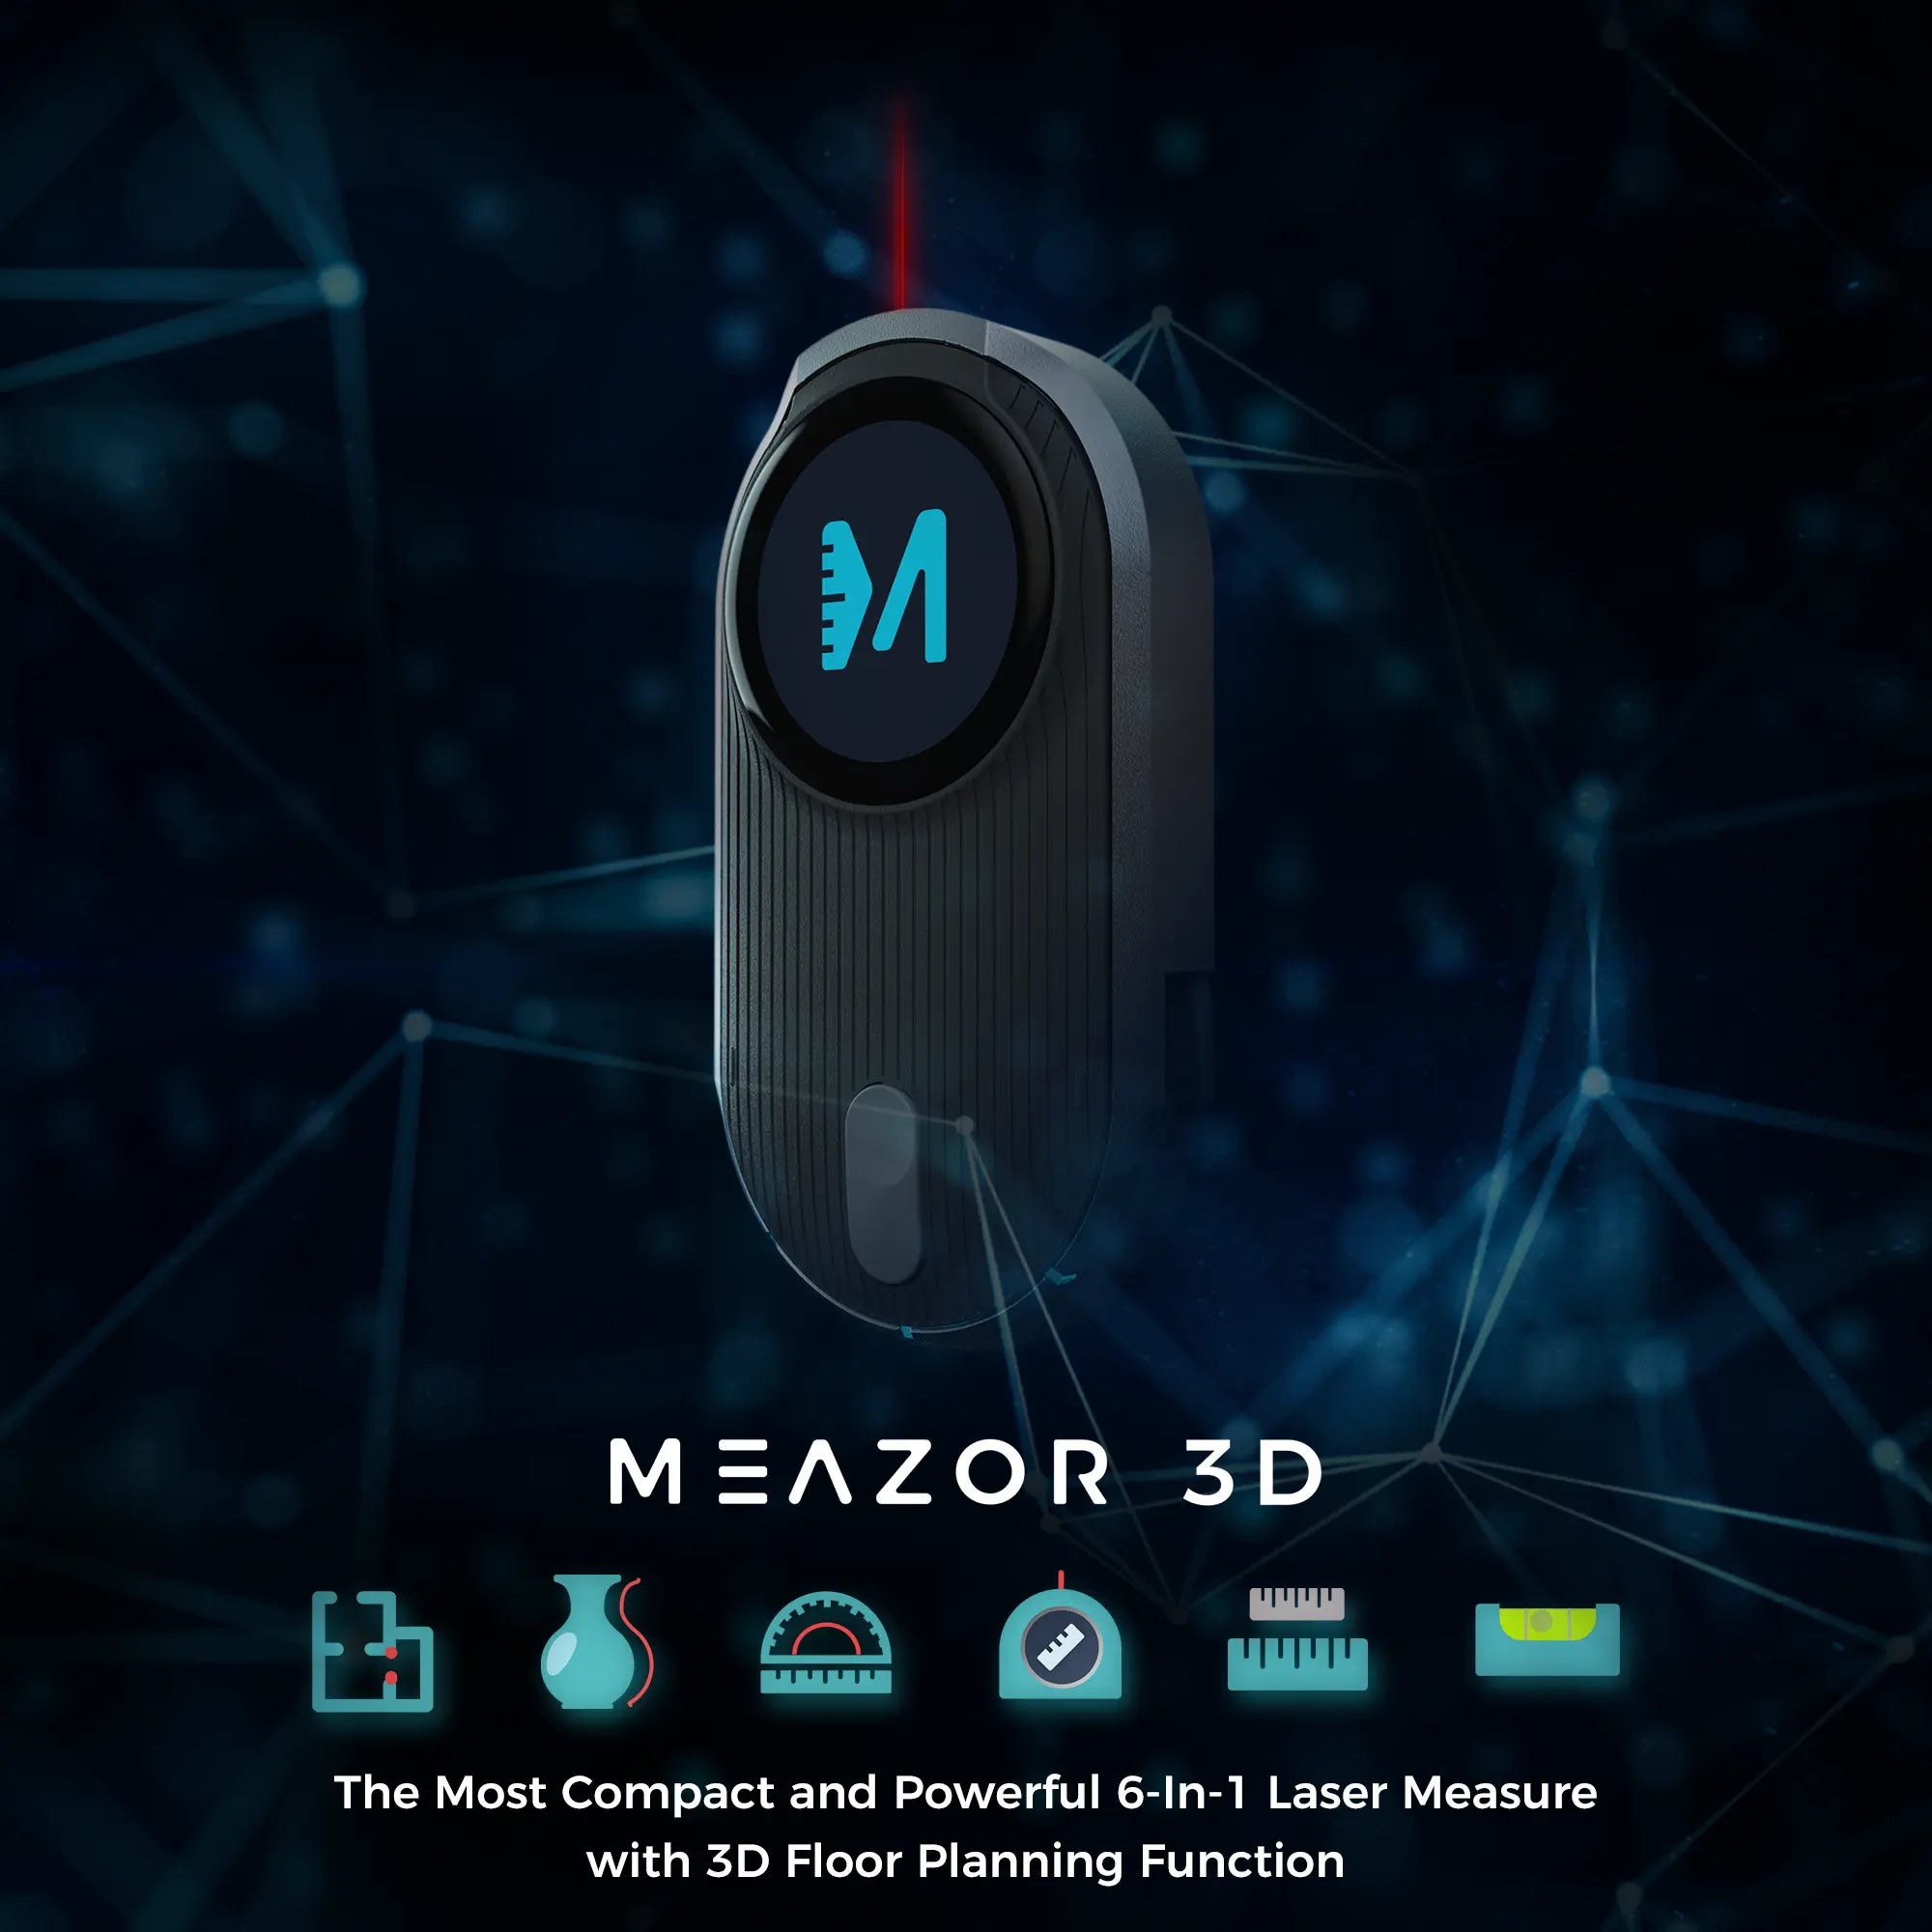 HOZO MEAZOR 3D offers highly accurate measurements and versatile modes for various applications. With built-in Bluetooth connectivity to transfer data to mobile devices and apps. The device includes 2D floor plan scanning, Rolling measurer and laser distance measurer and much more capabilities. Its user-friendly interface, durability, and compact design make it convenient for users.